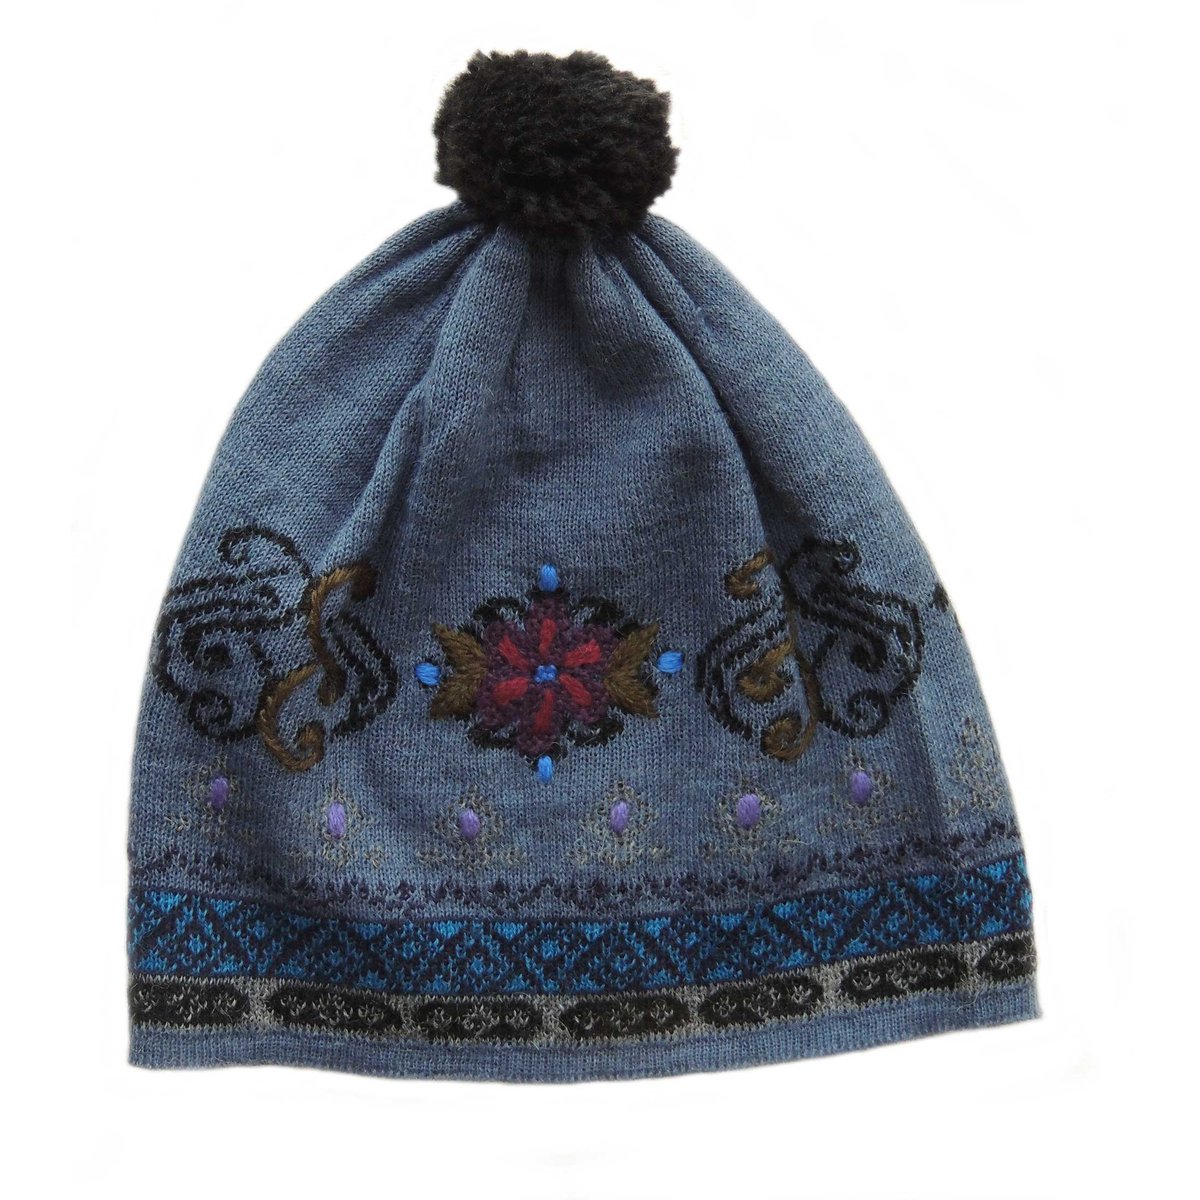 Women's beanie alpaca hat with pom pom and embroidered details, blue - black SALE!!!  only one left etsy.me/3isLi77 #alpacablendbeanie #womensbeanie #alpacabeaniehat #alpacahat #knittedhat #womenwinterbeanie #womensbirthdaygift